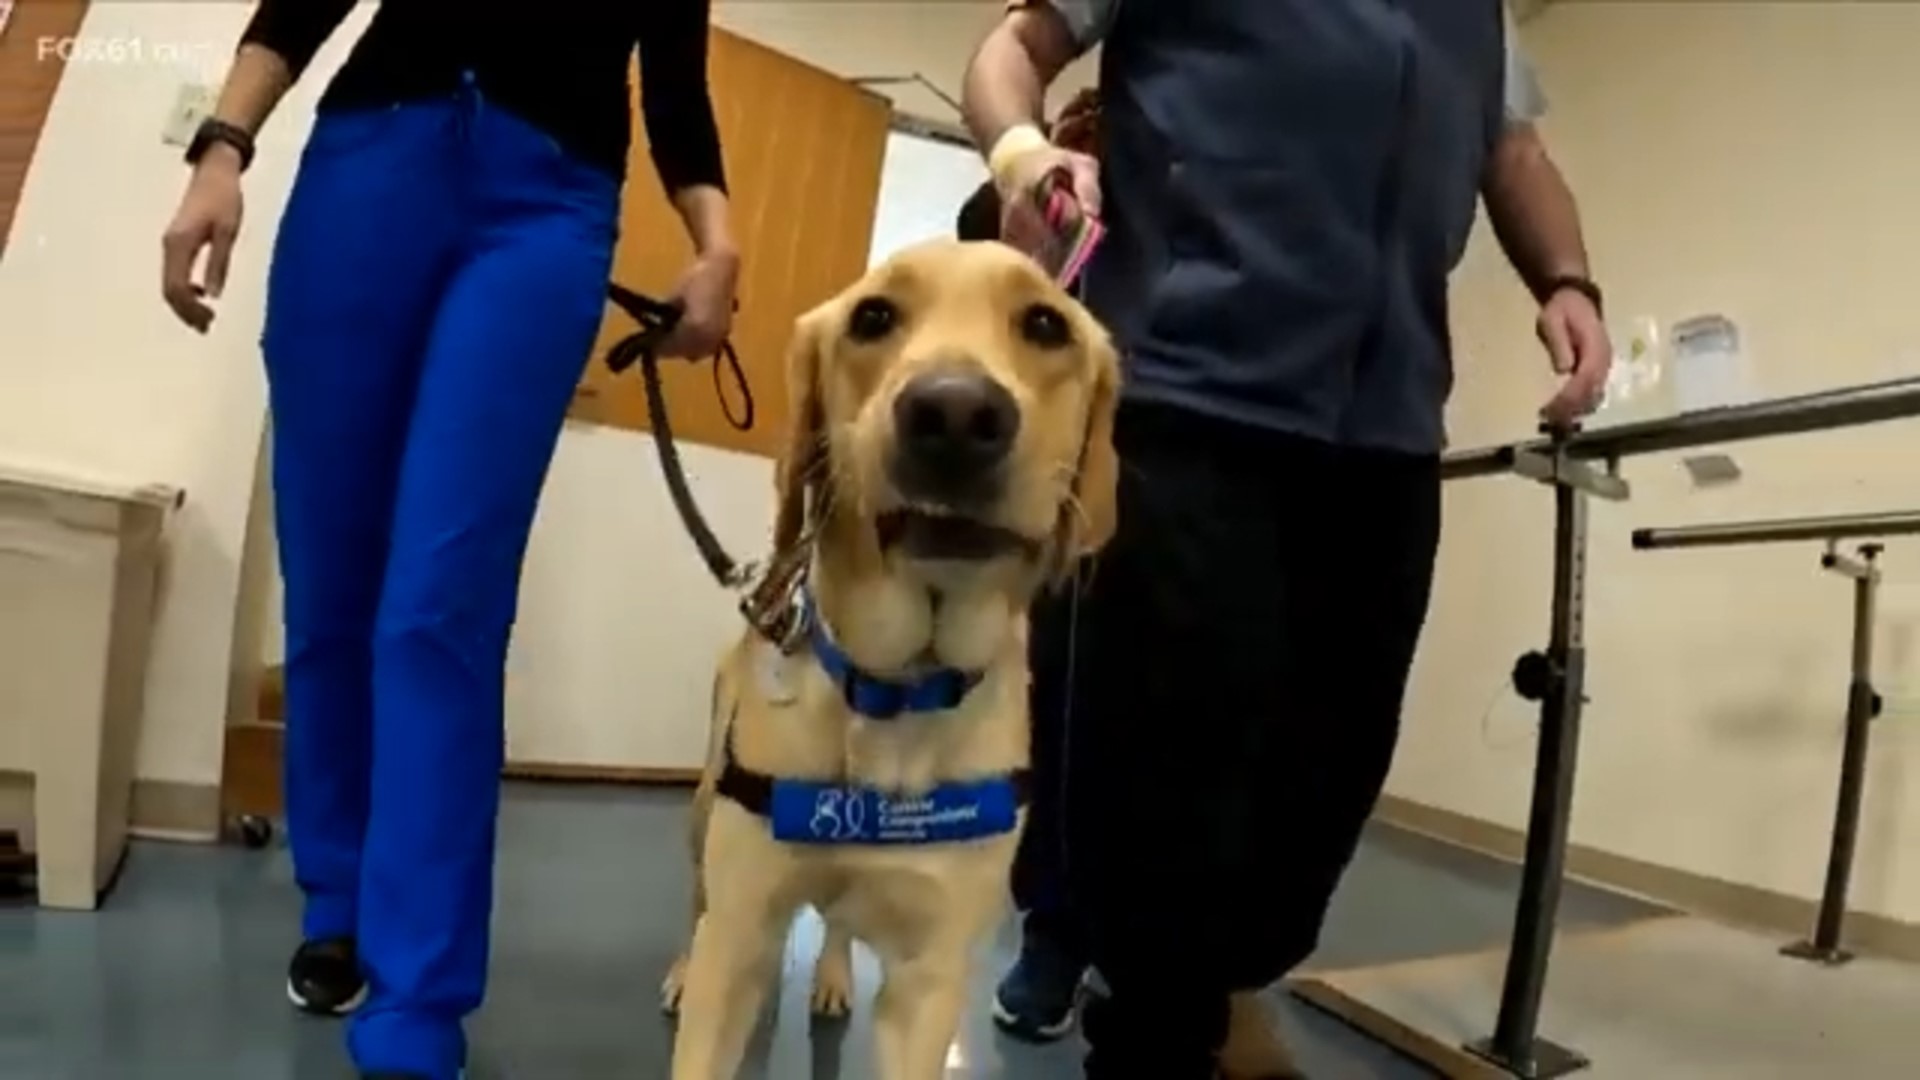 Mandy, the Golden Retriever mix at Gaylord Hospital is helping patients as they recover.